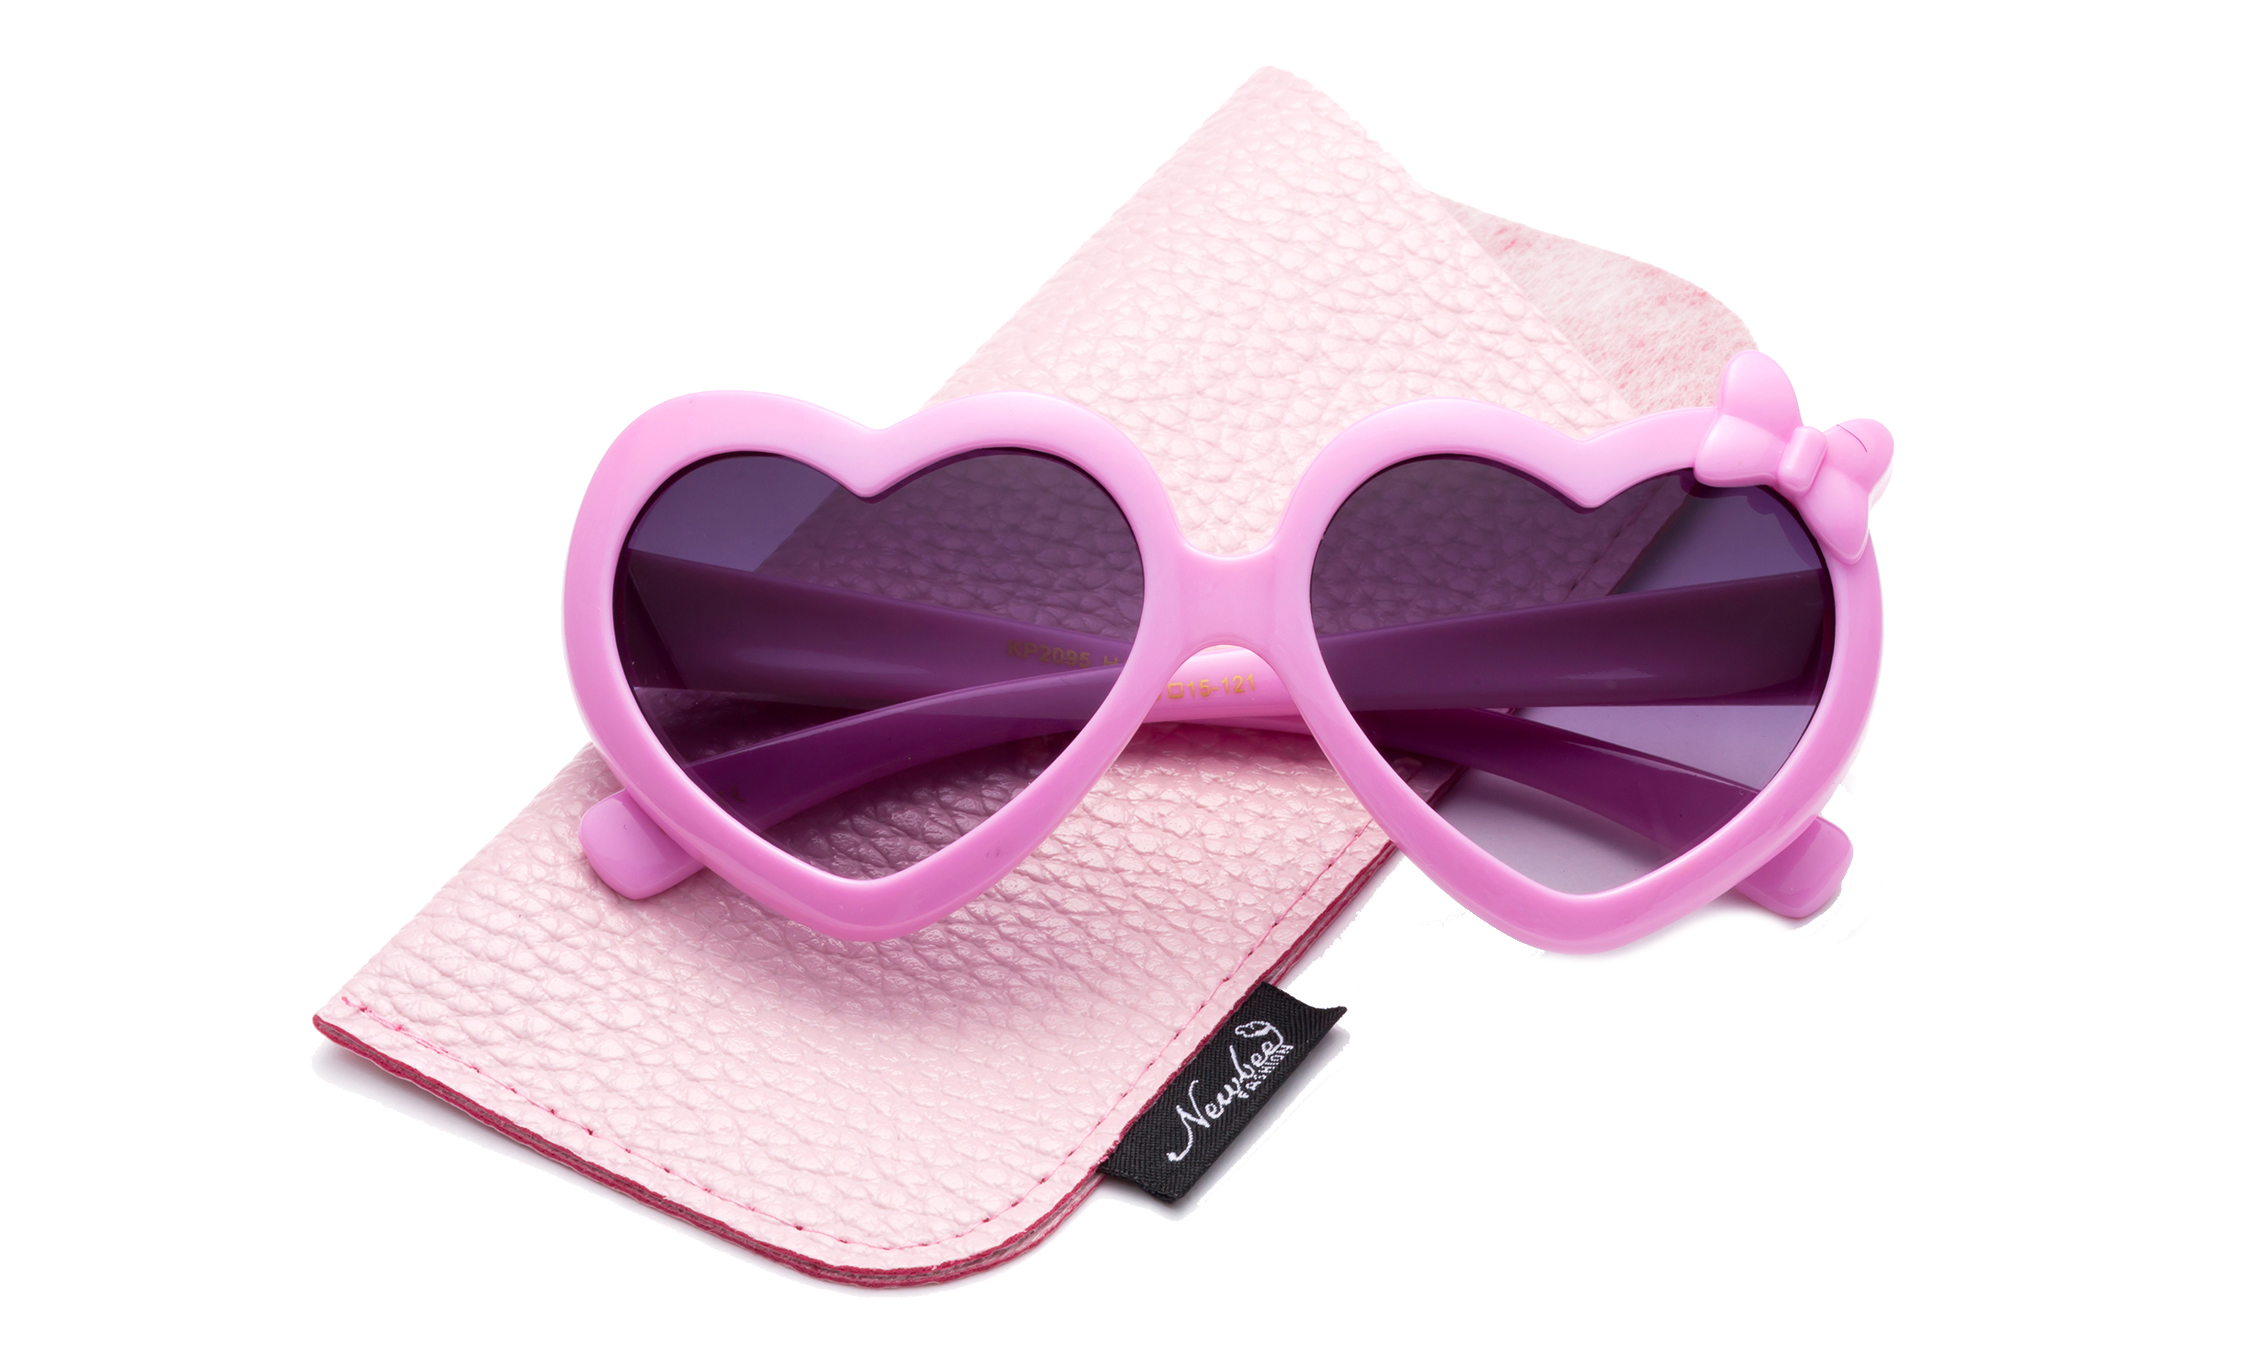 Newbee Fashion- Girls Heart Sunglasses with Bow Cute Heart Shaped Sunglasses for Girls Fashion Sunglasses UV Protection w/Carrying Pouch - image 3 of 3